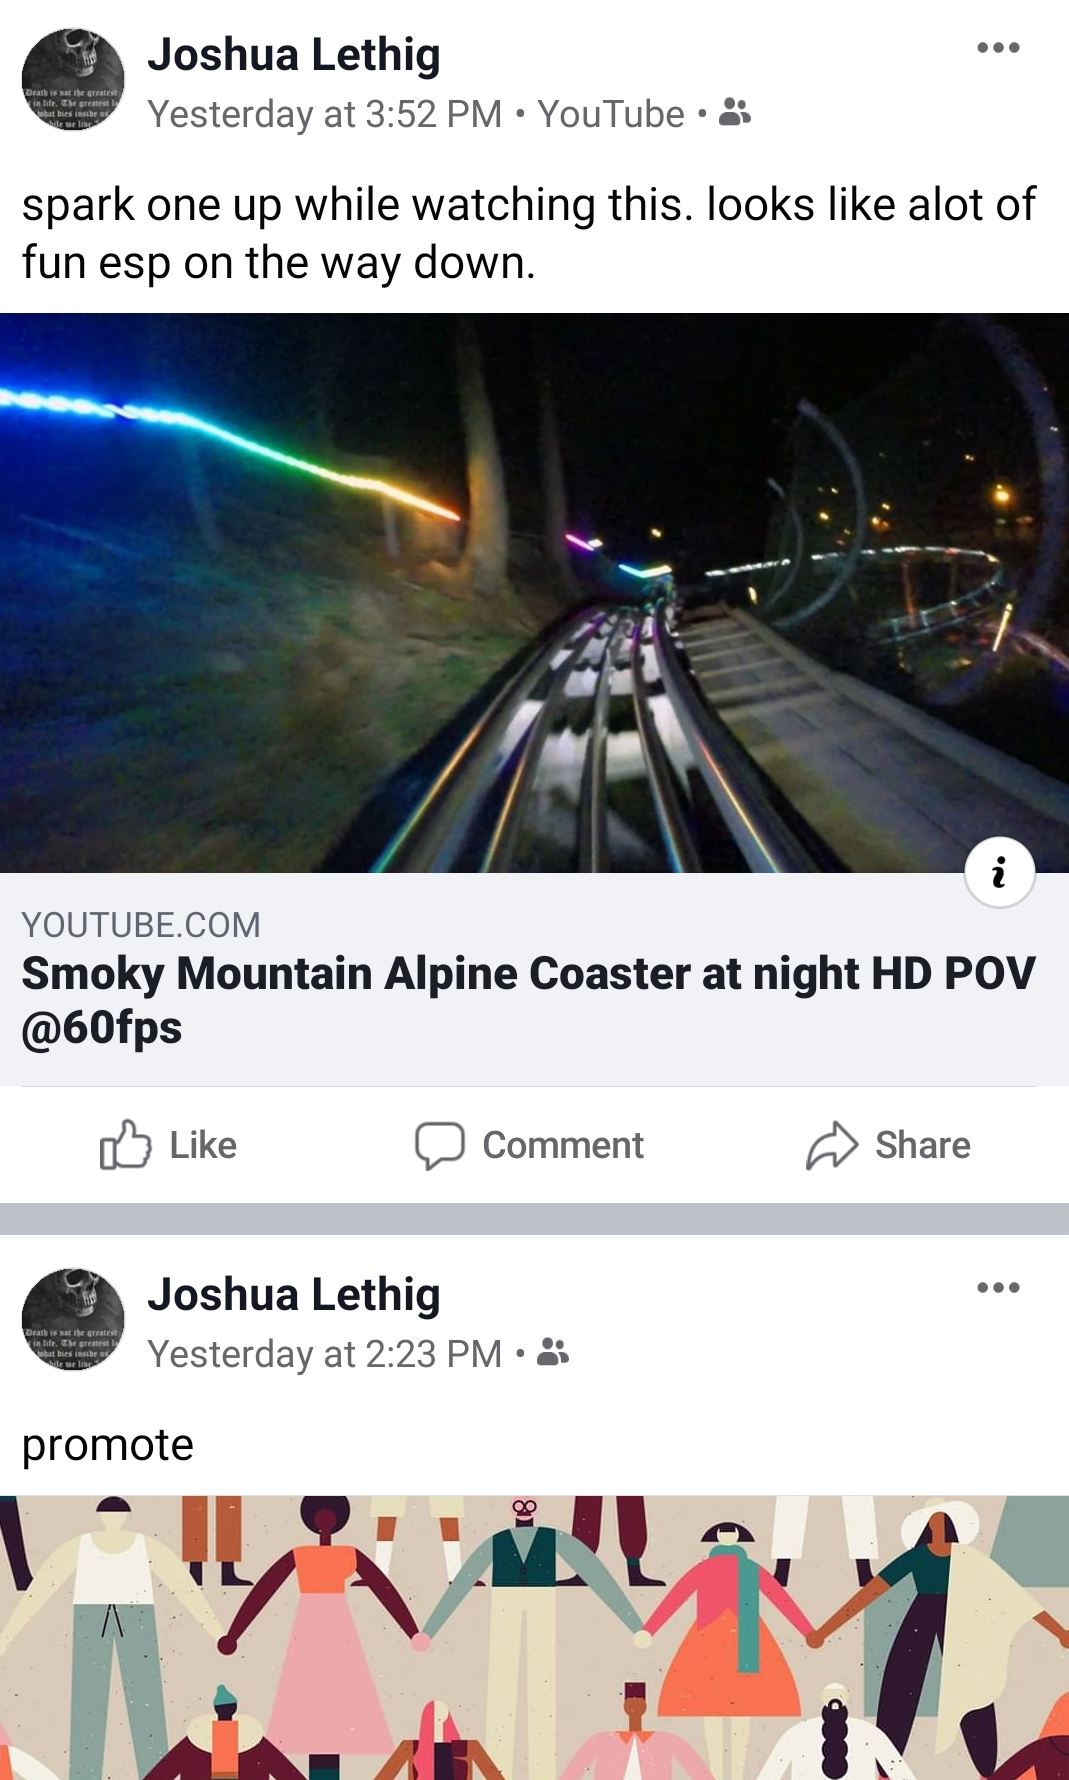 graphic design - Joshua Lethig Yesterday at YouTube spark one up while watching this. looks alot of fun esp on the way down. Youtube.Com Smoky Mountain Alpine Coaster at night Hd Pov Comment Joshua Lethig Yesterday at promote